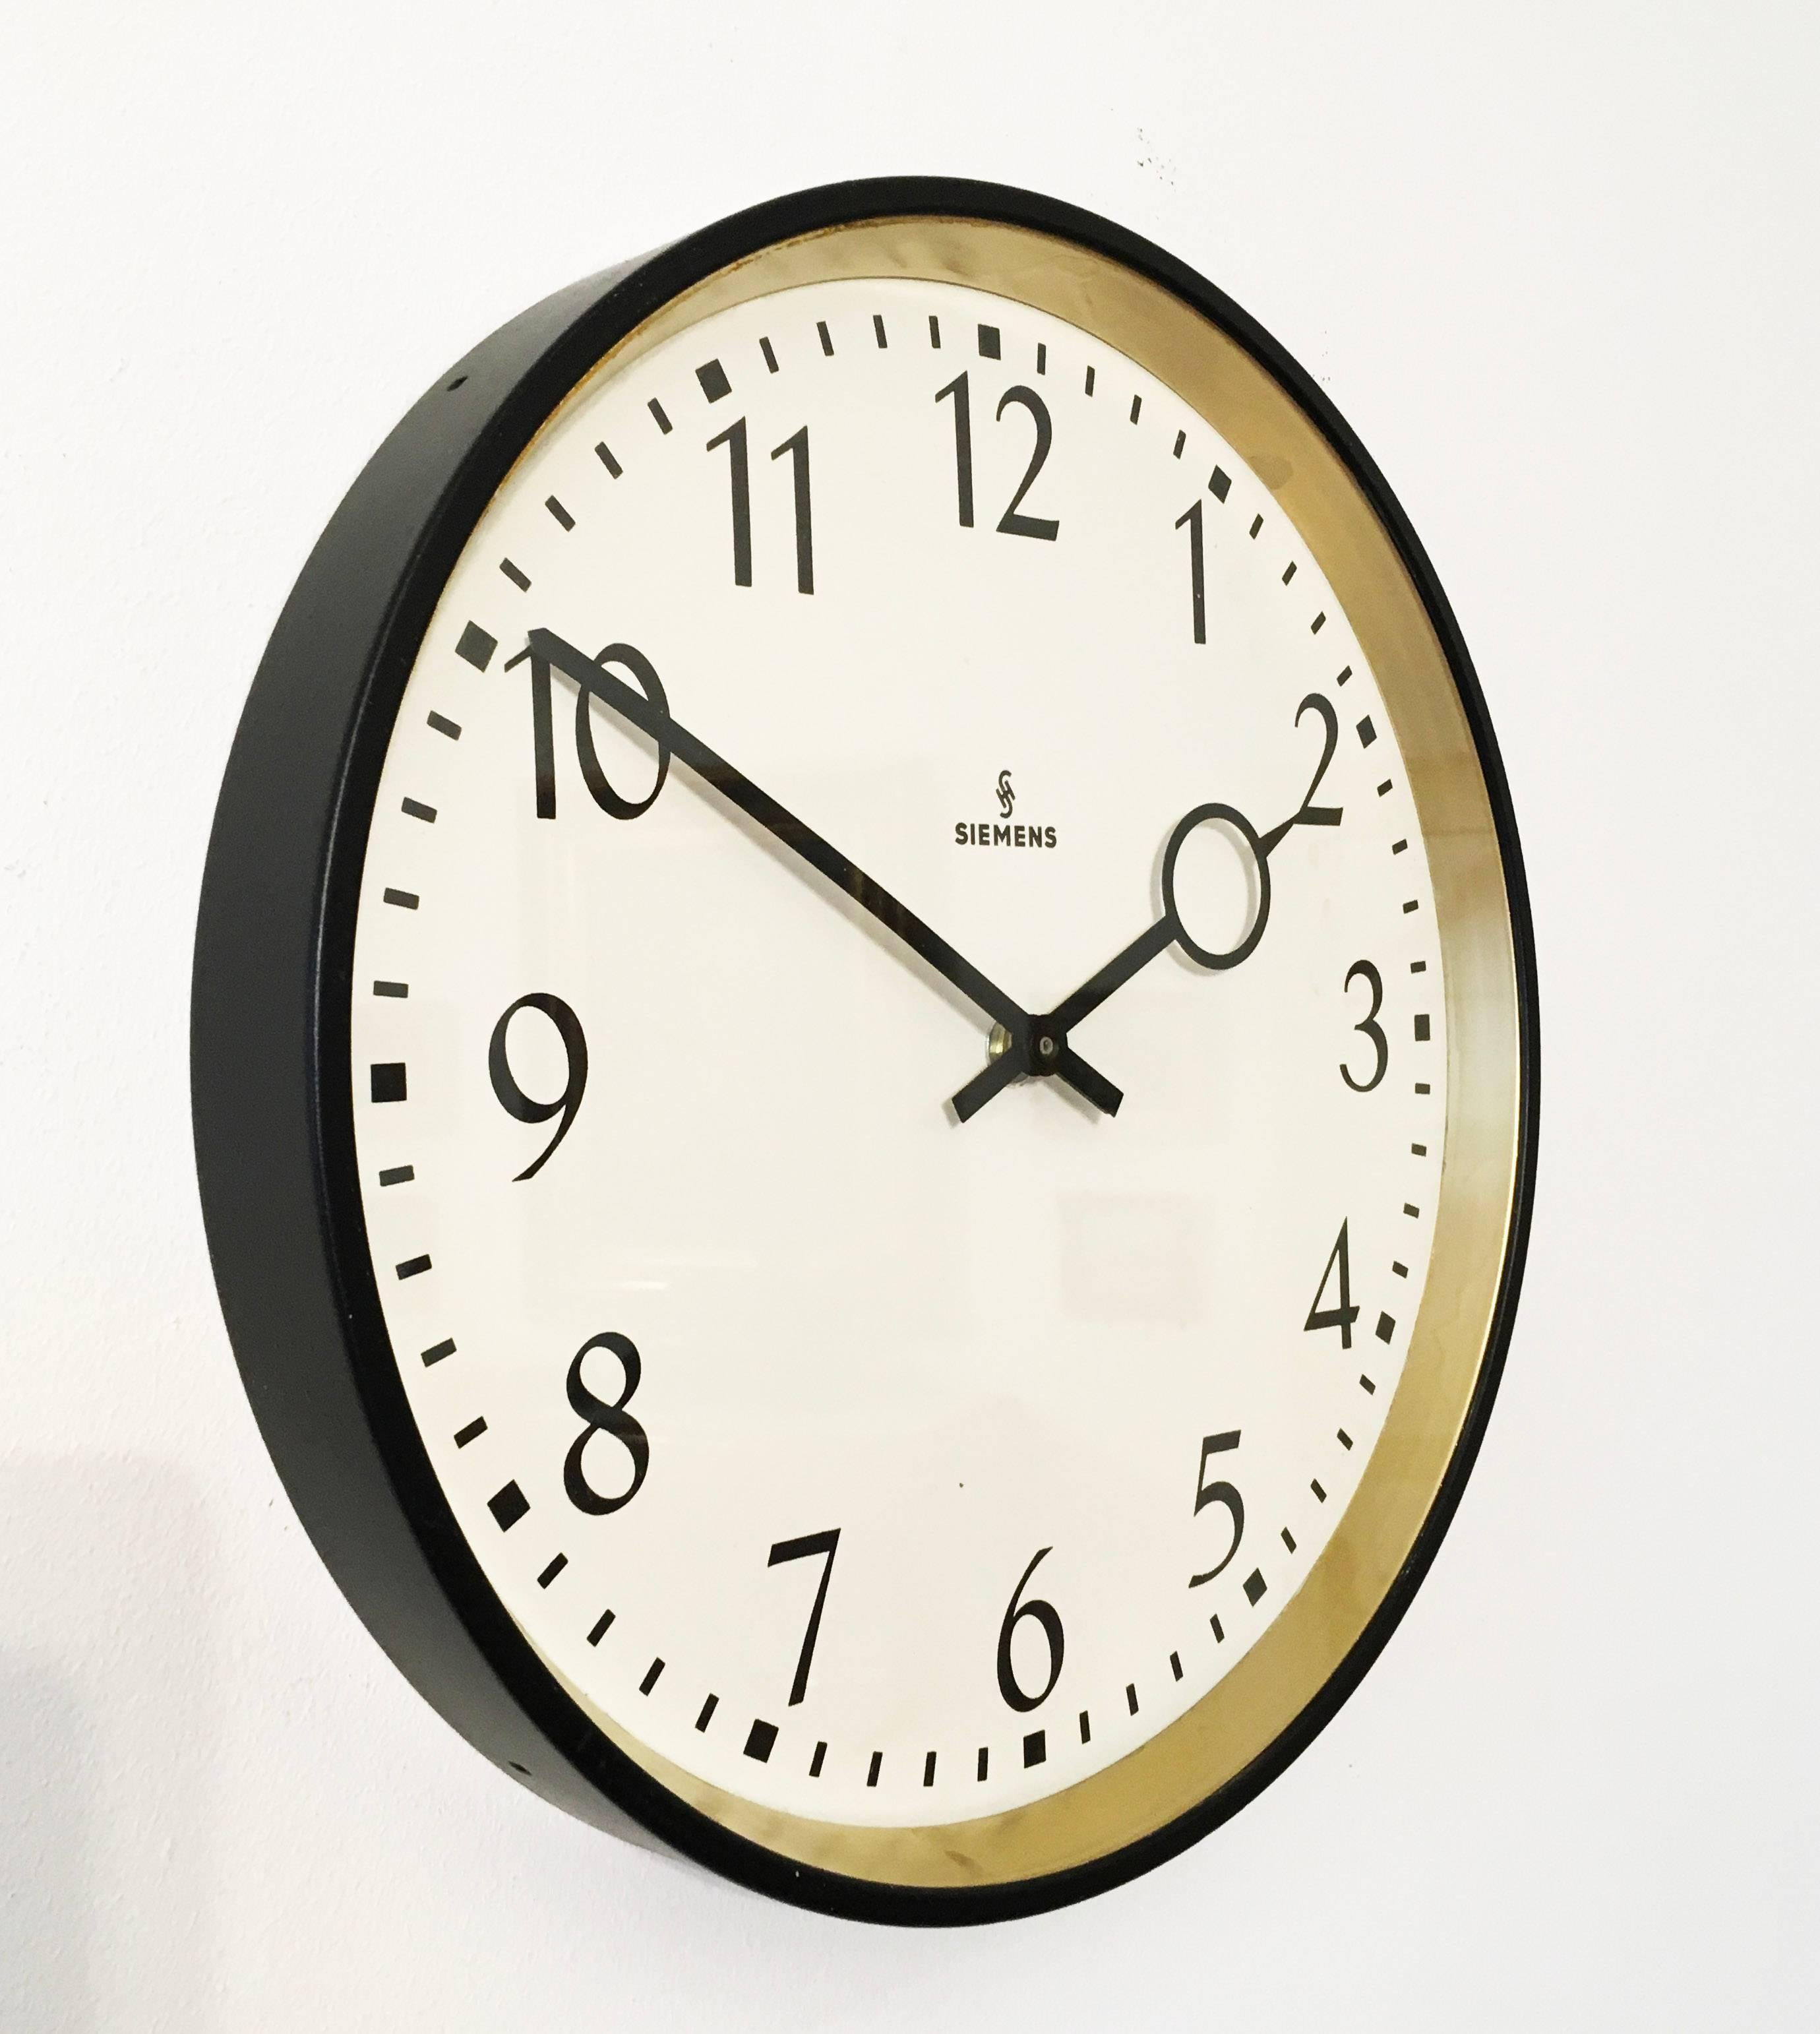 Steel painted with glass front made in Germany in the 1960s.
Formerly a slave clock, it is now fitted with a modern quartz movement with a AA battery.